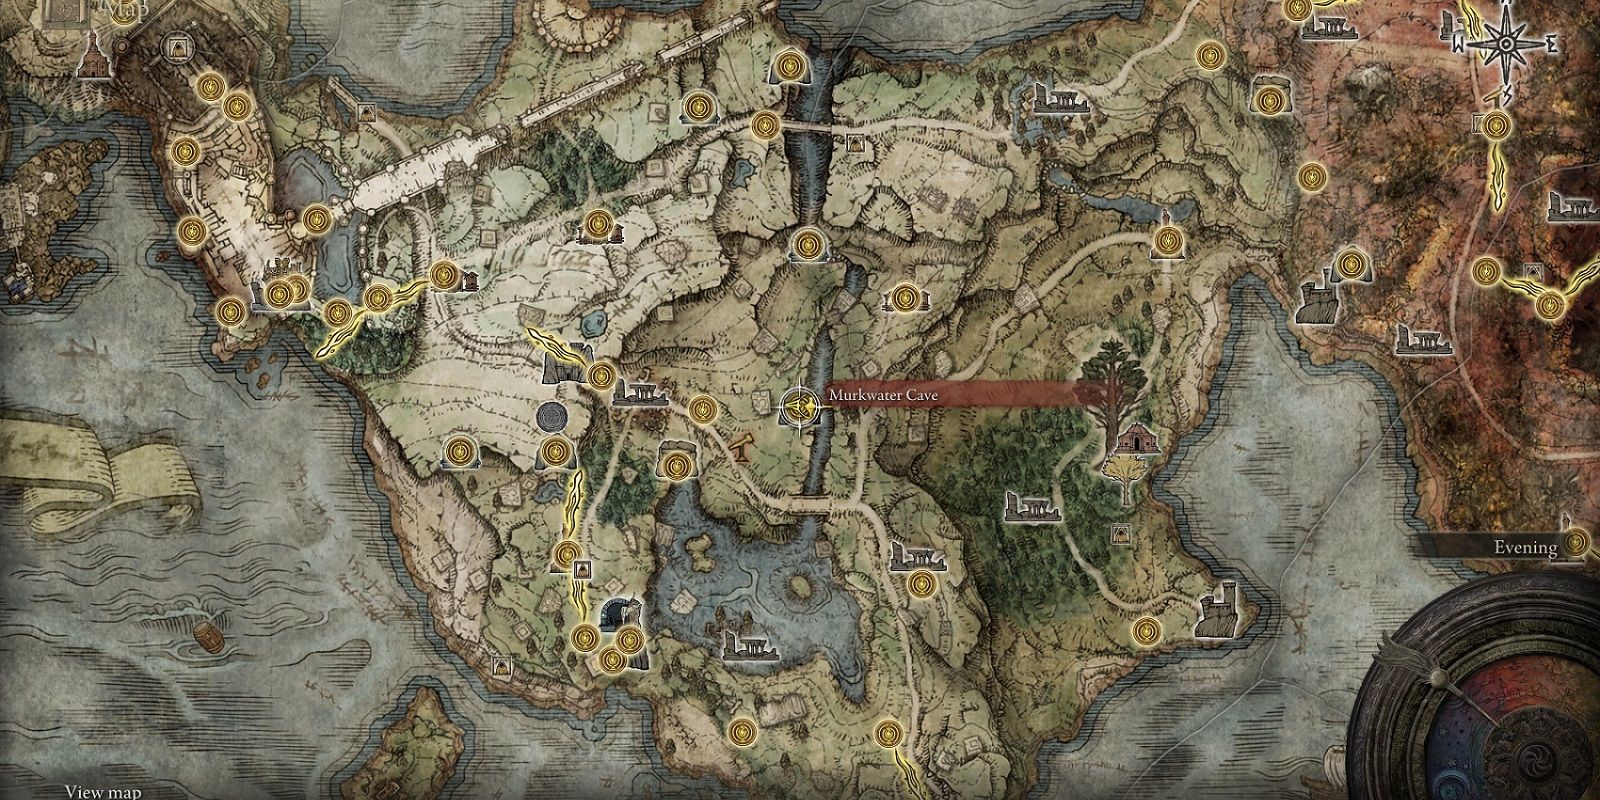 Elden Ring Map of Limgrave, Murkwater Cave Marked